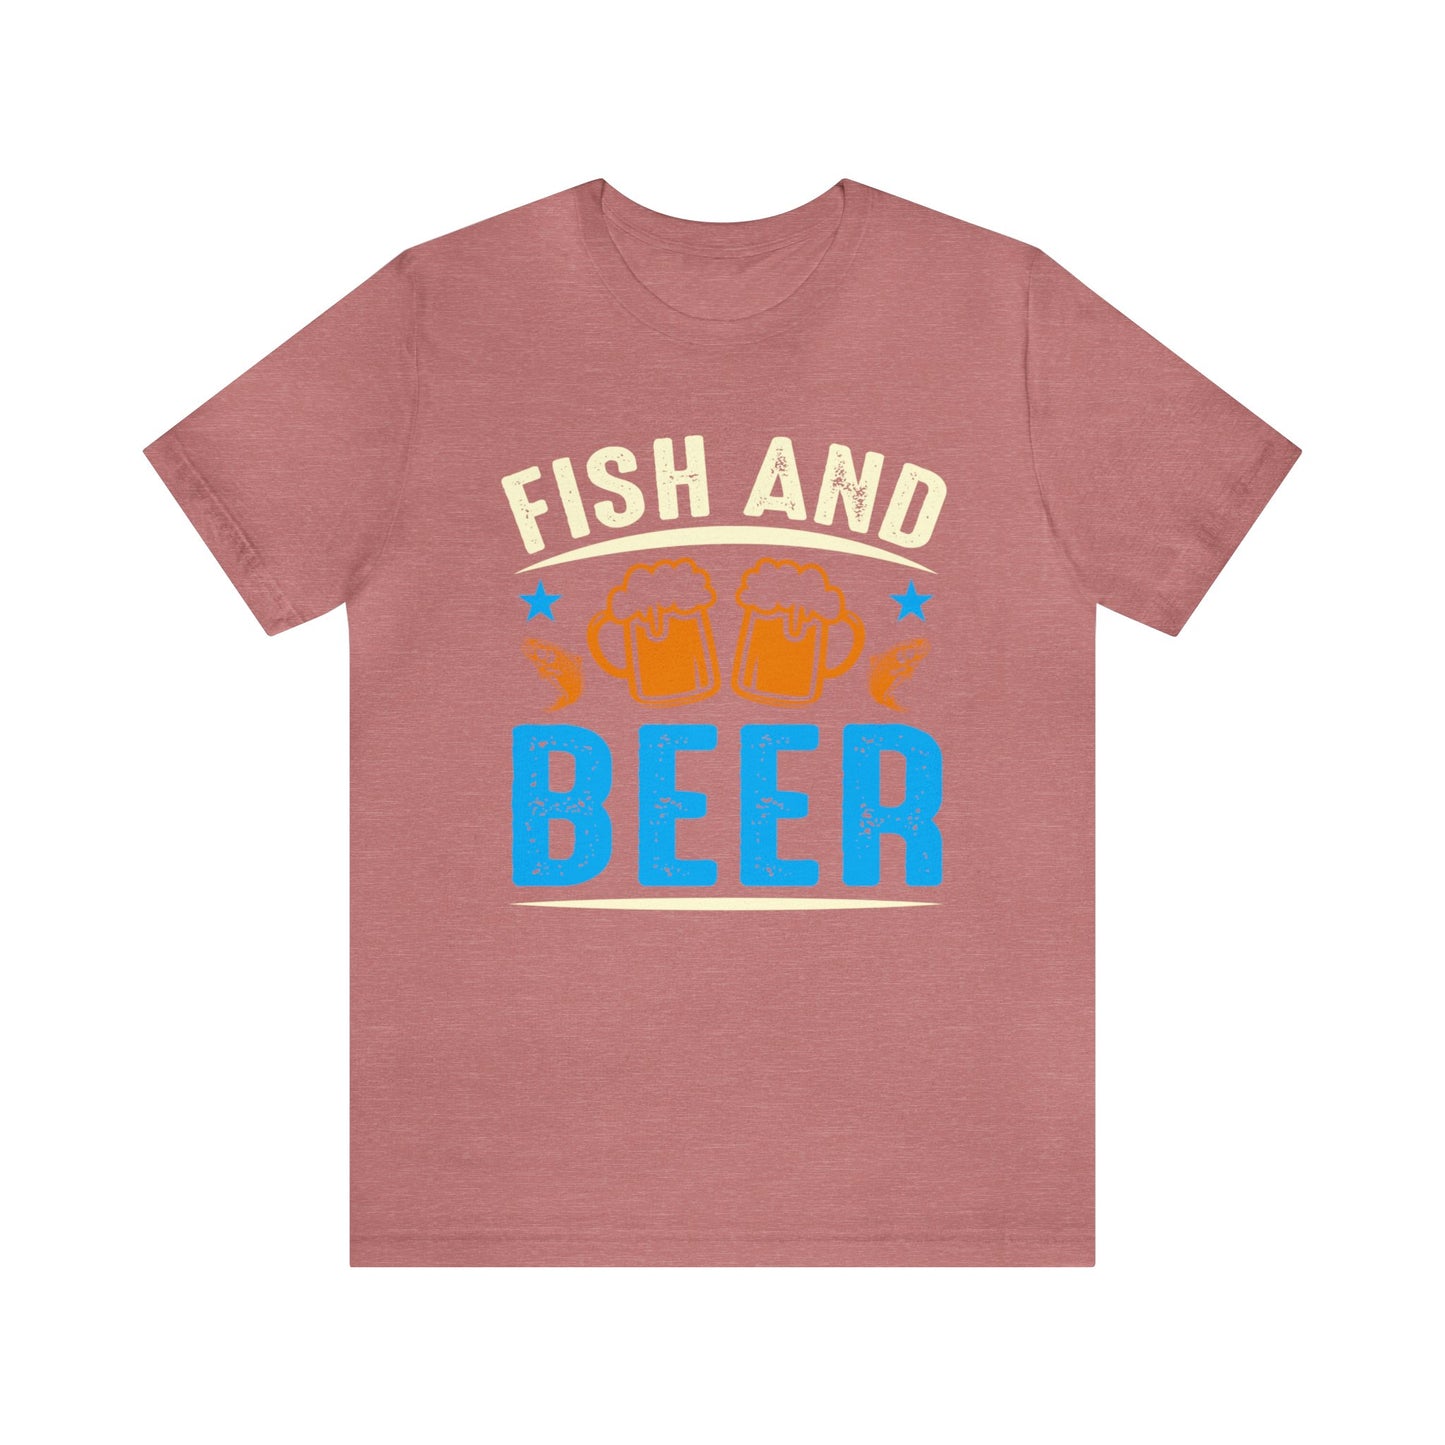 Reel in Style with Our Exclusive 'Fish and Beer' Graphic T-Shirt